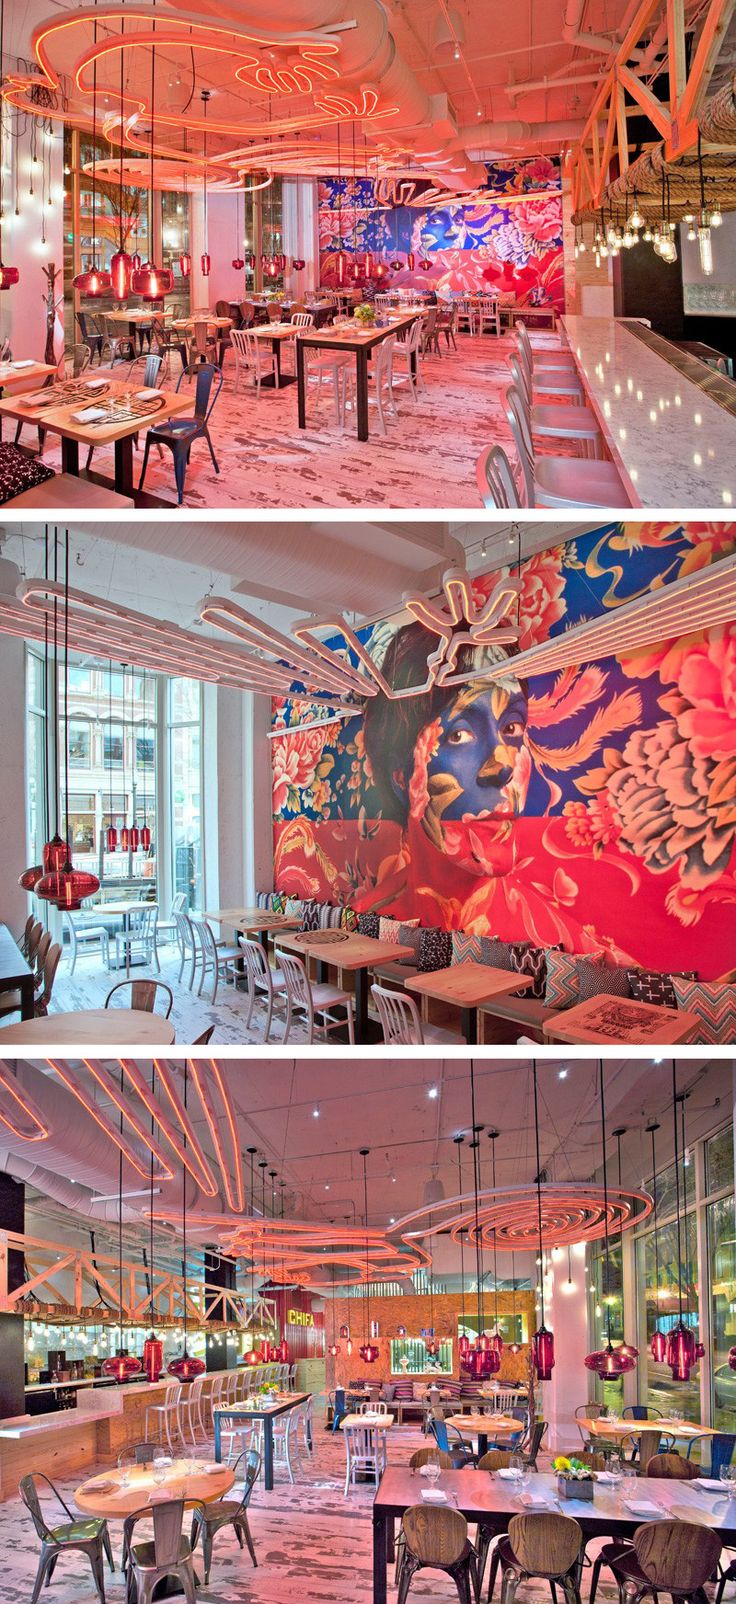 A large mural covers the wall of this brightly colored restaurant.